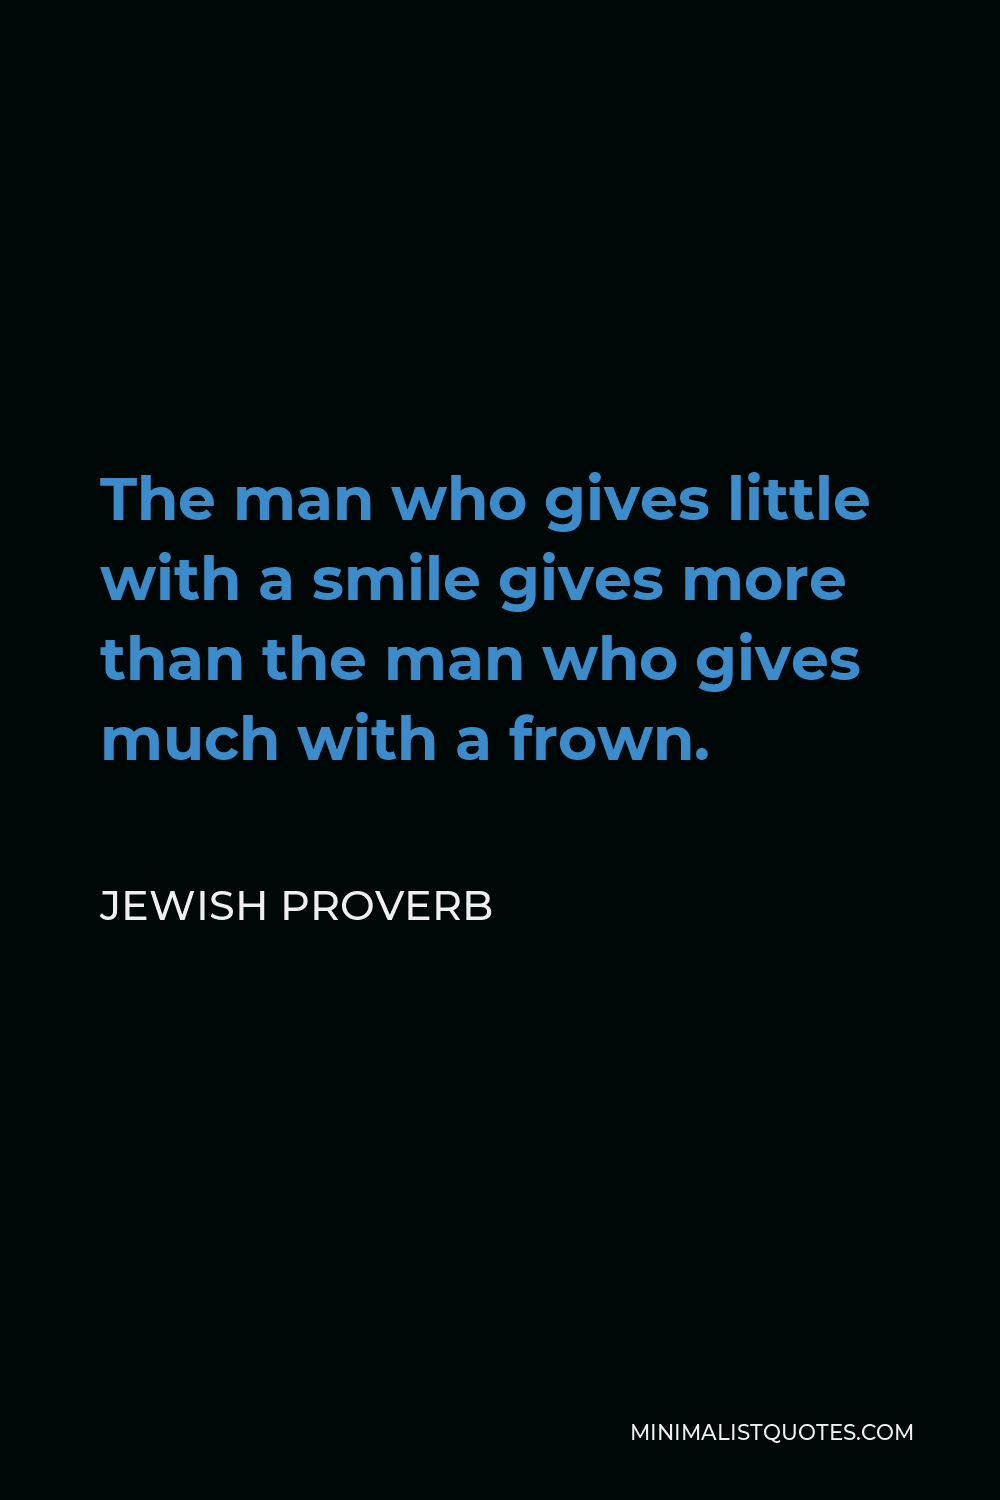 Jewish Proverb Quote - The man who gives little with a smile gives more than the man who gives much with a frown.